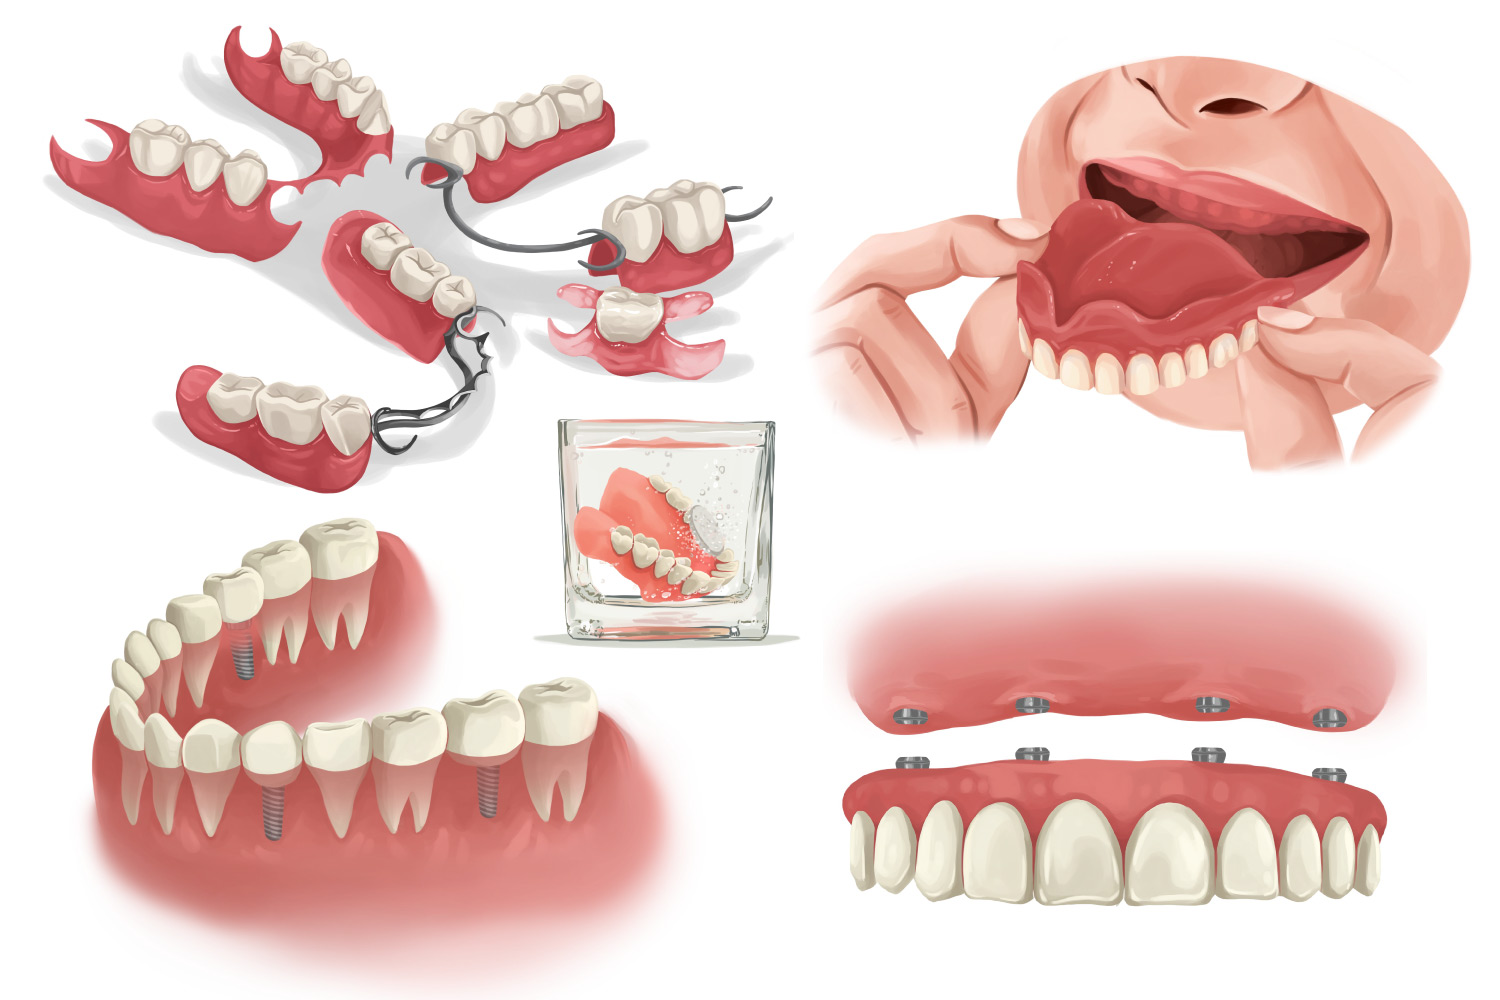 Illustrations of dentures vs. dental implants to replace missing teeth